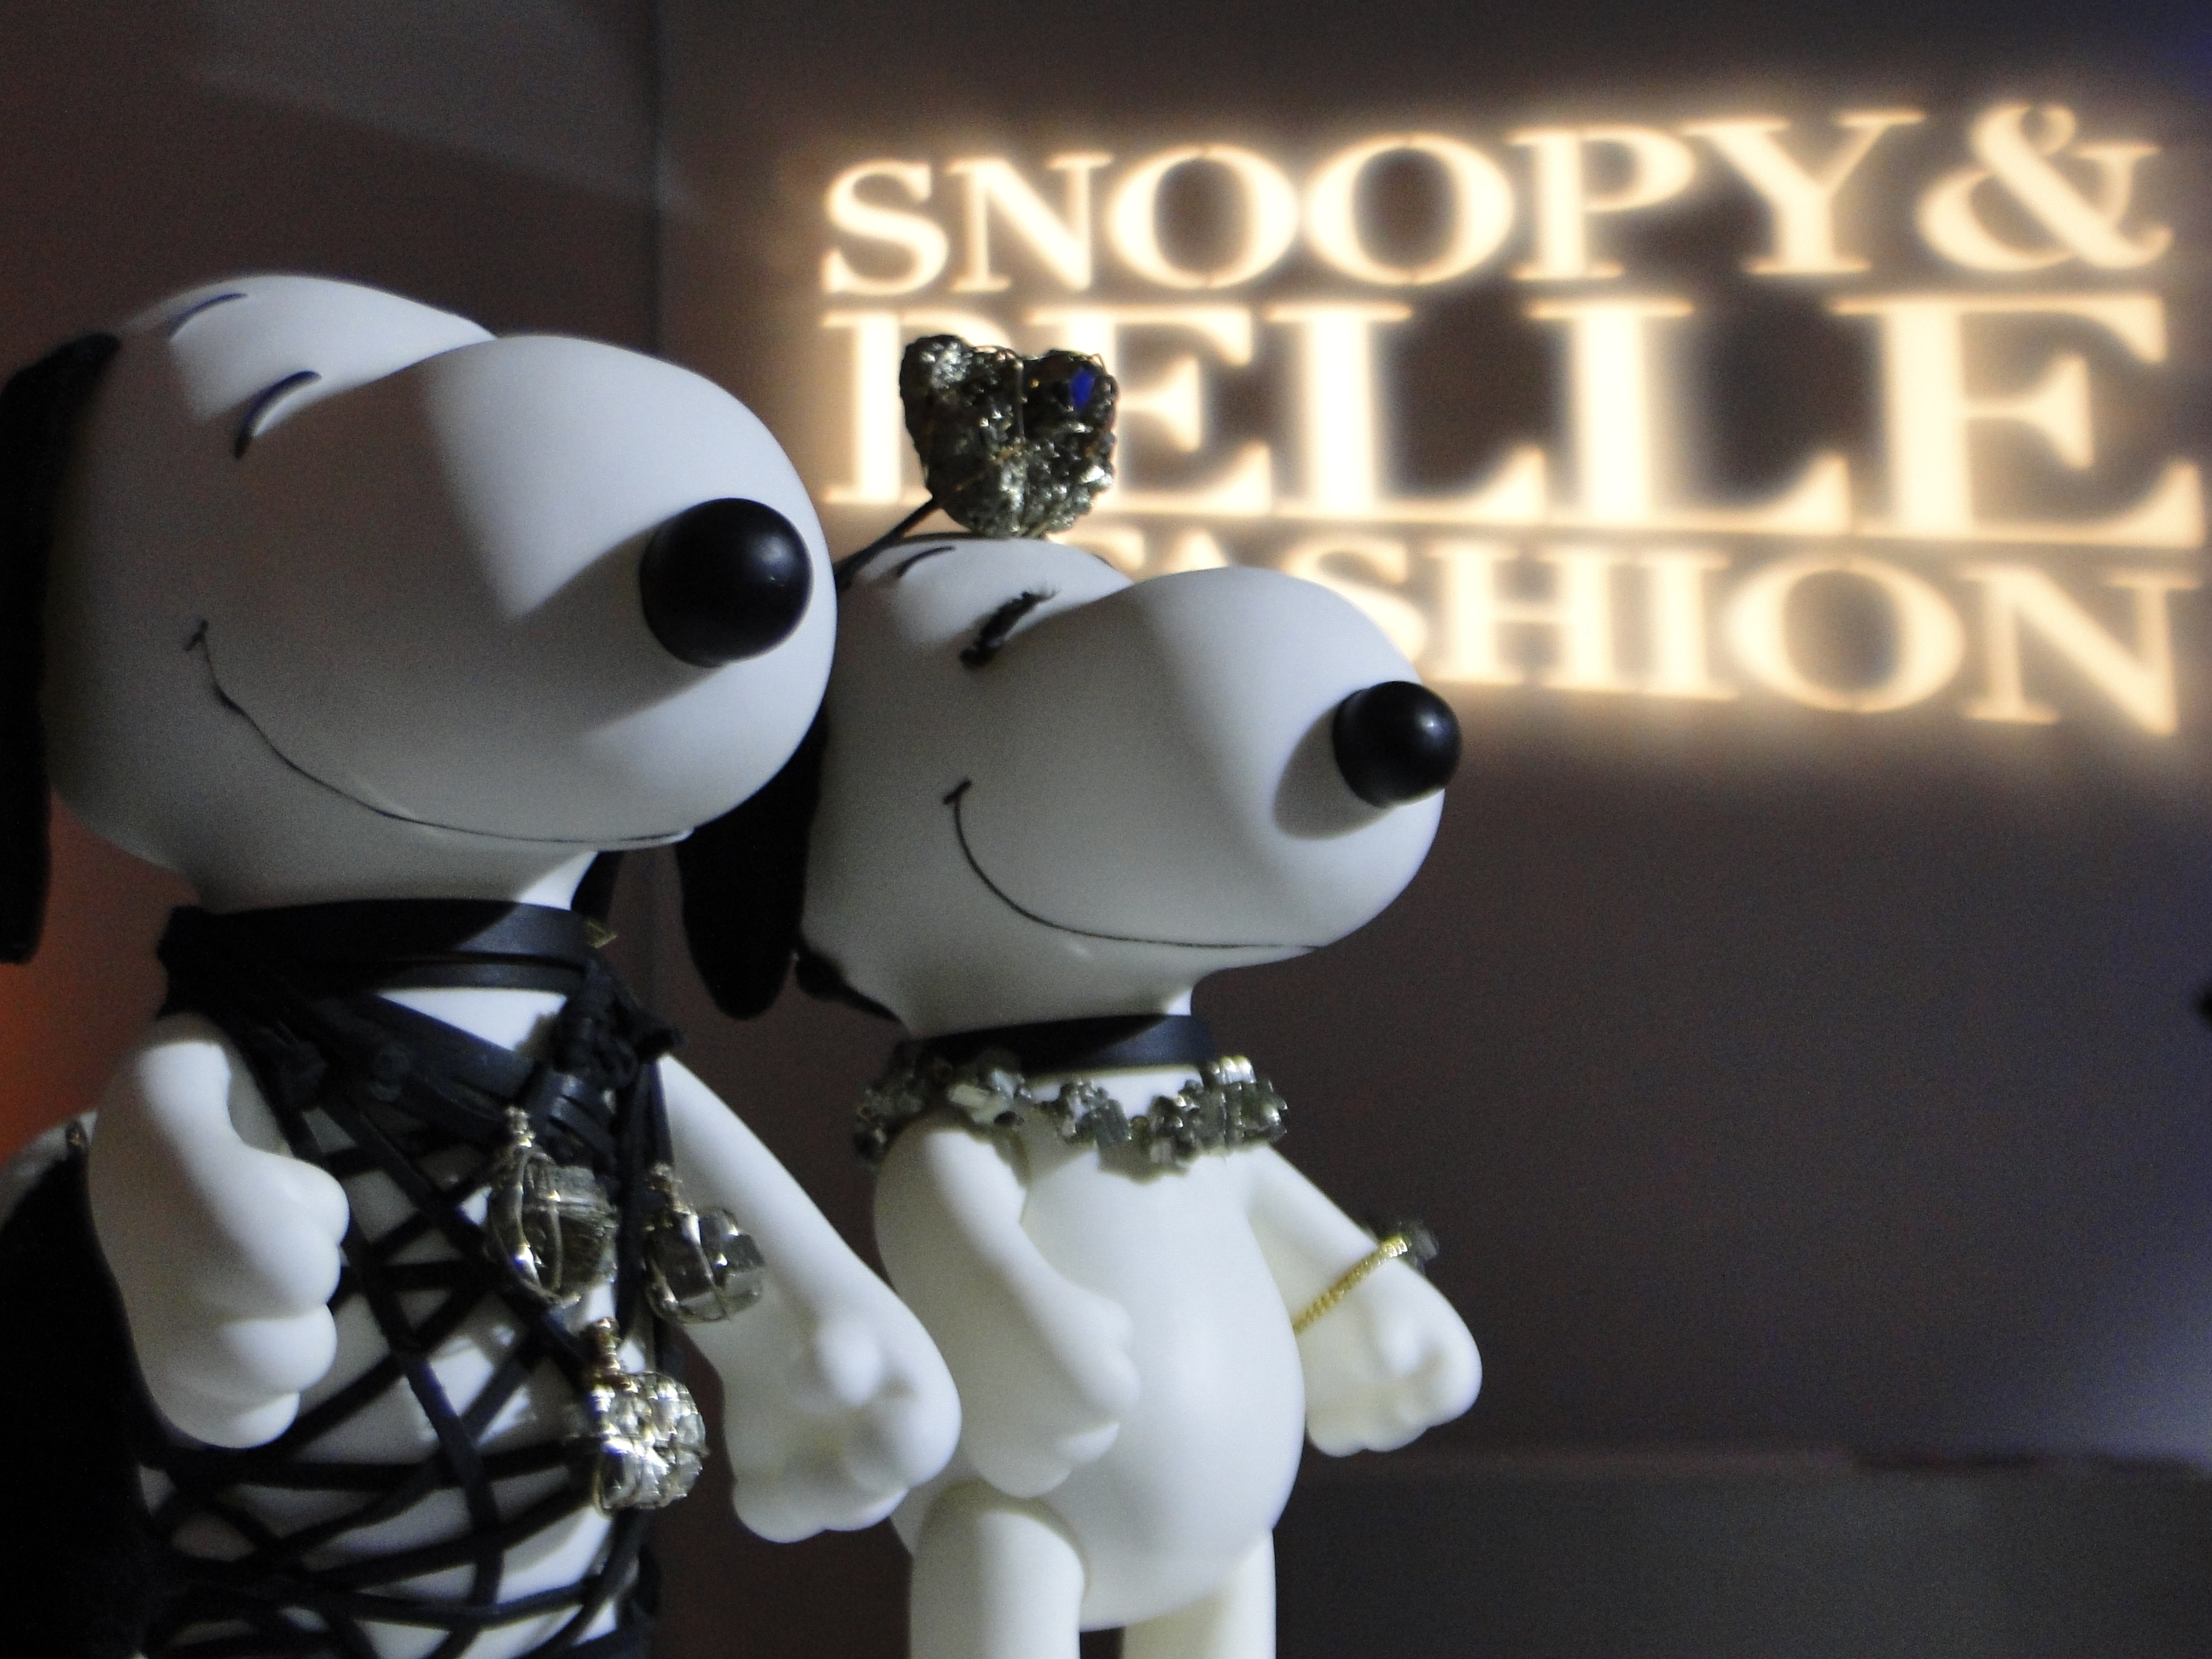 SNOOPY AND BELE IN FASHION Paris France Exhibition Exposition - Palais de Tokyo - copyright Go with the Blog DSC06455